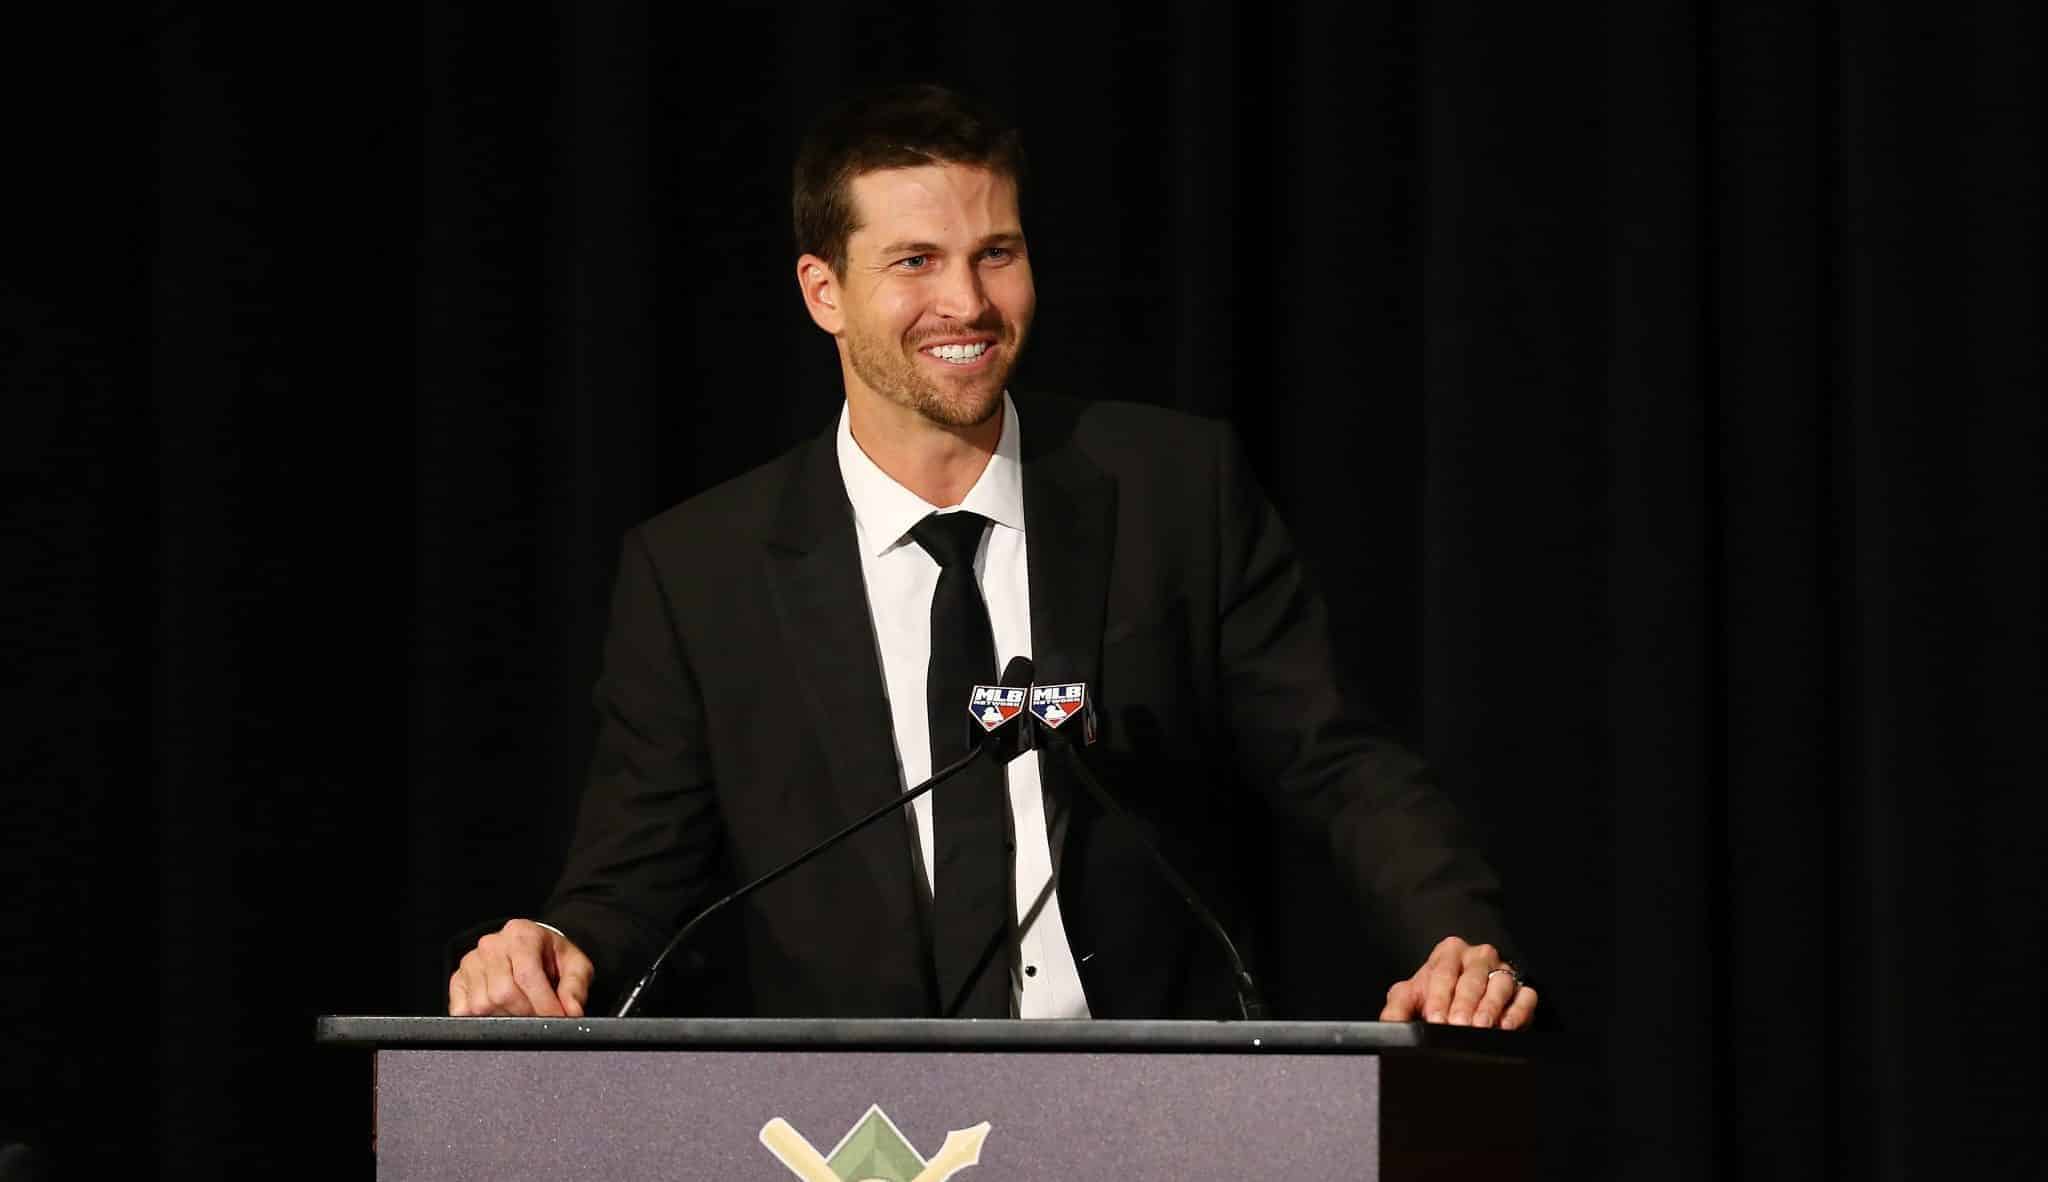 NEW YORK, NEW YORK - JANUARY 25: Jacob deGrom of the New York Mets speaks after receiving the 2109 National League Cy Young Award during the 97th annual New York Baseball Writers' Dinner on January 25, 2020 Sheraton New York in New York City.